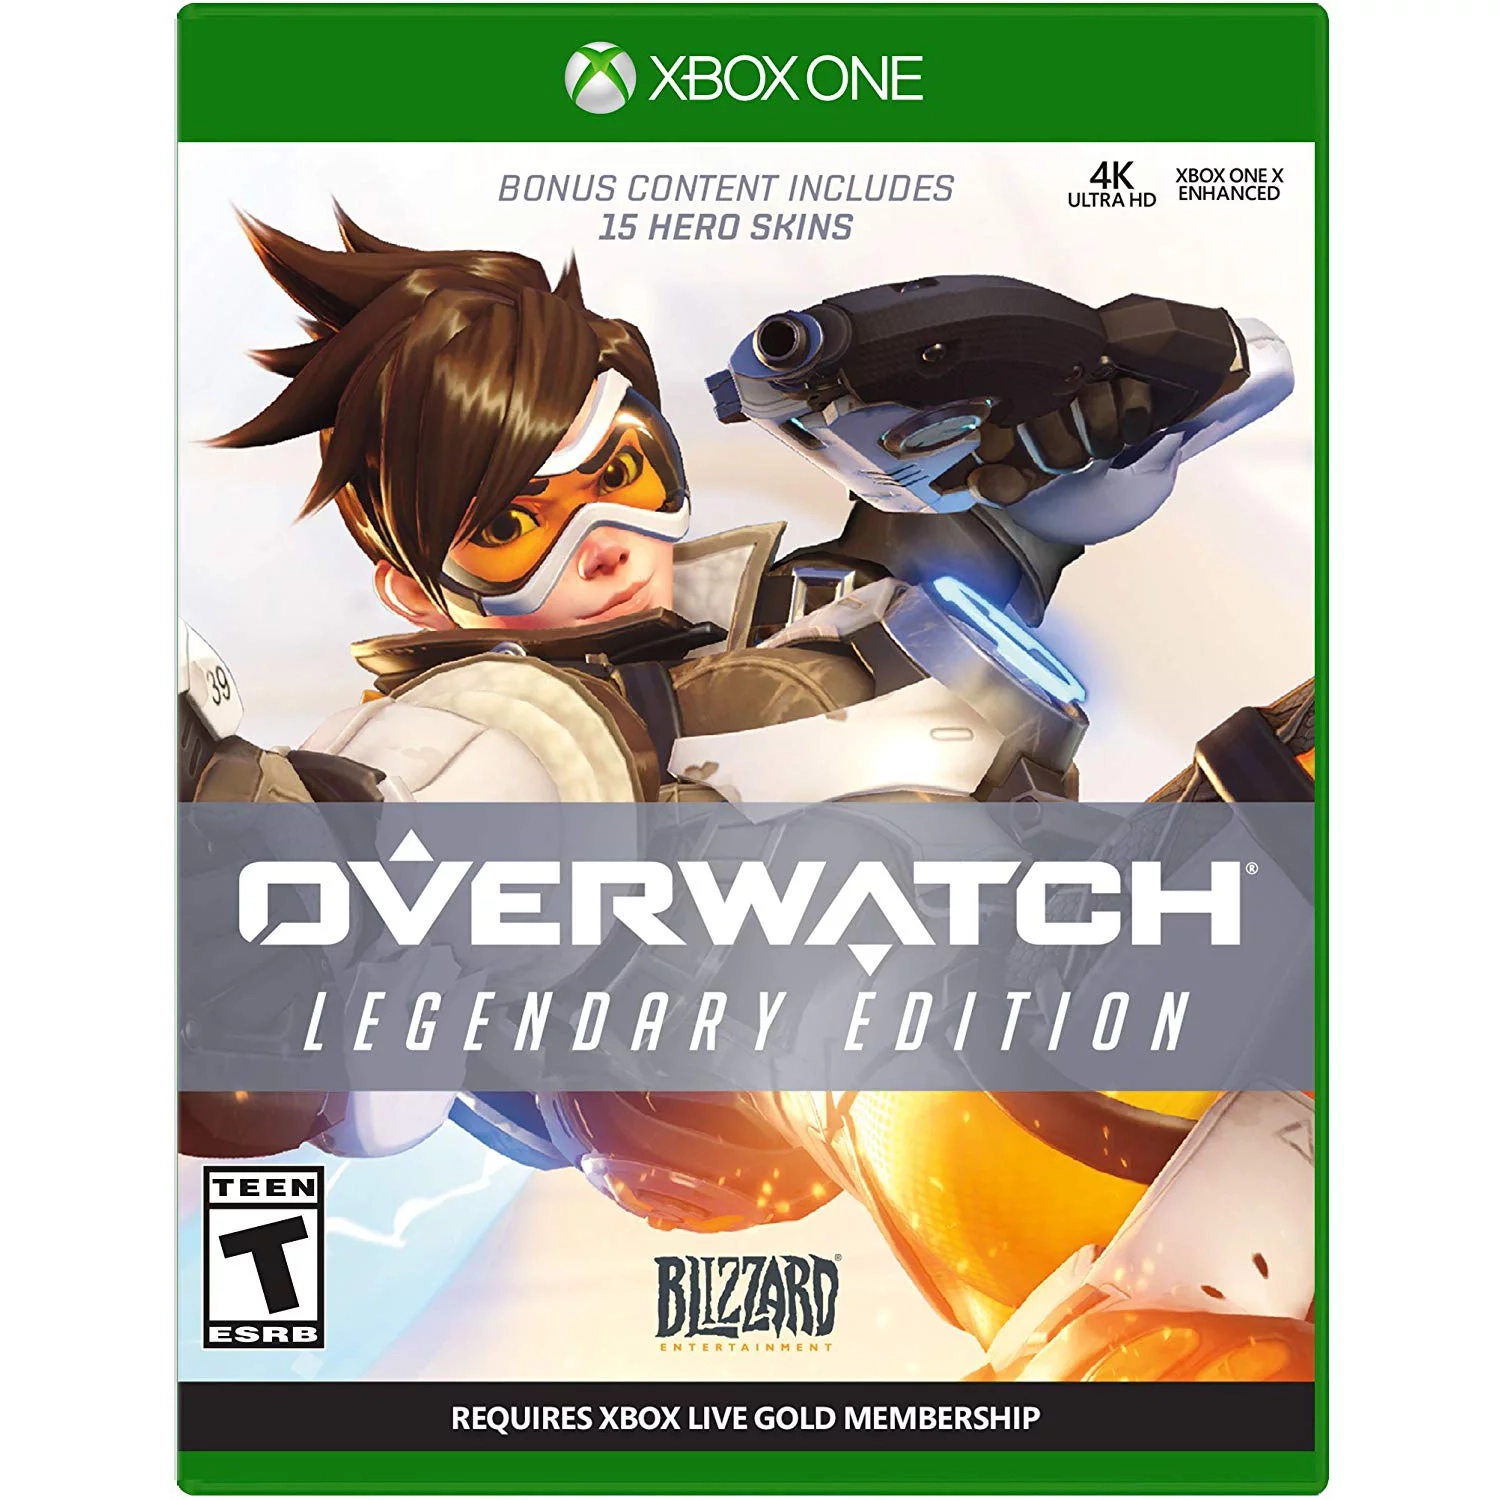 Overwatch - Legendary Edition for Xbox One [VIDEOGAMES]